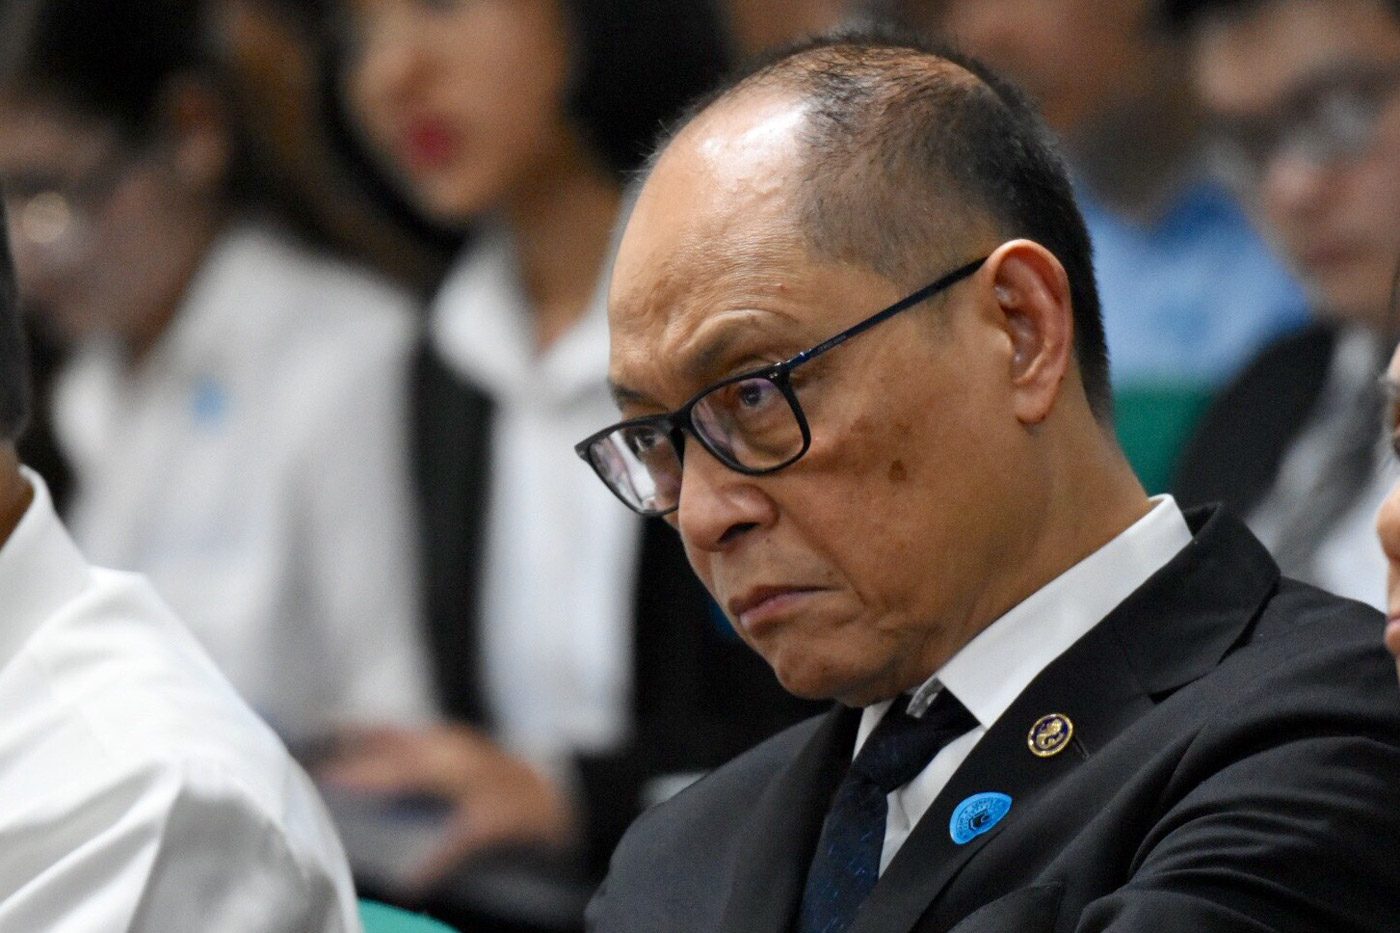 Philippine peso sinking to P58 vs $1 ‘unlikely’ – Diokno